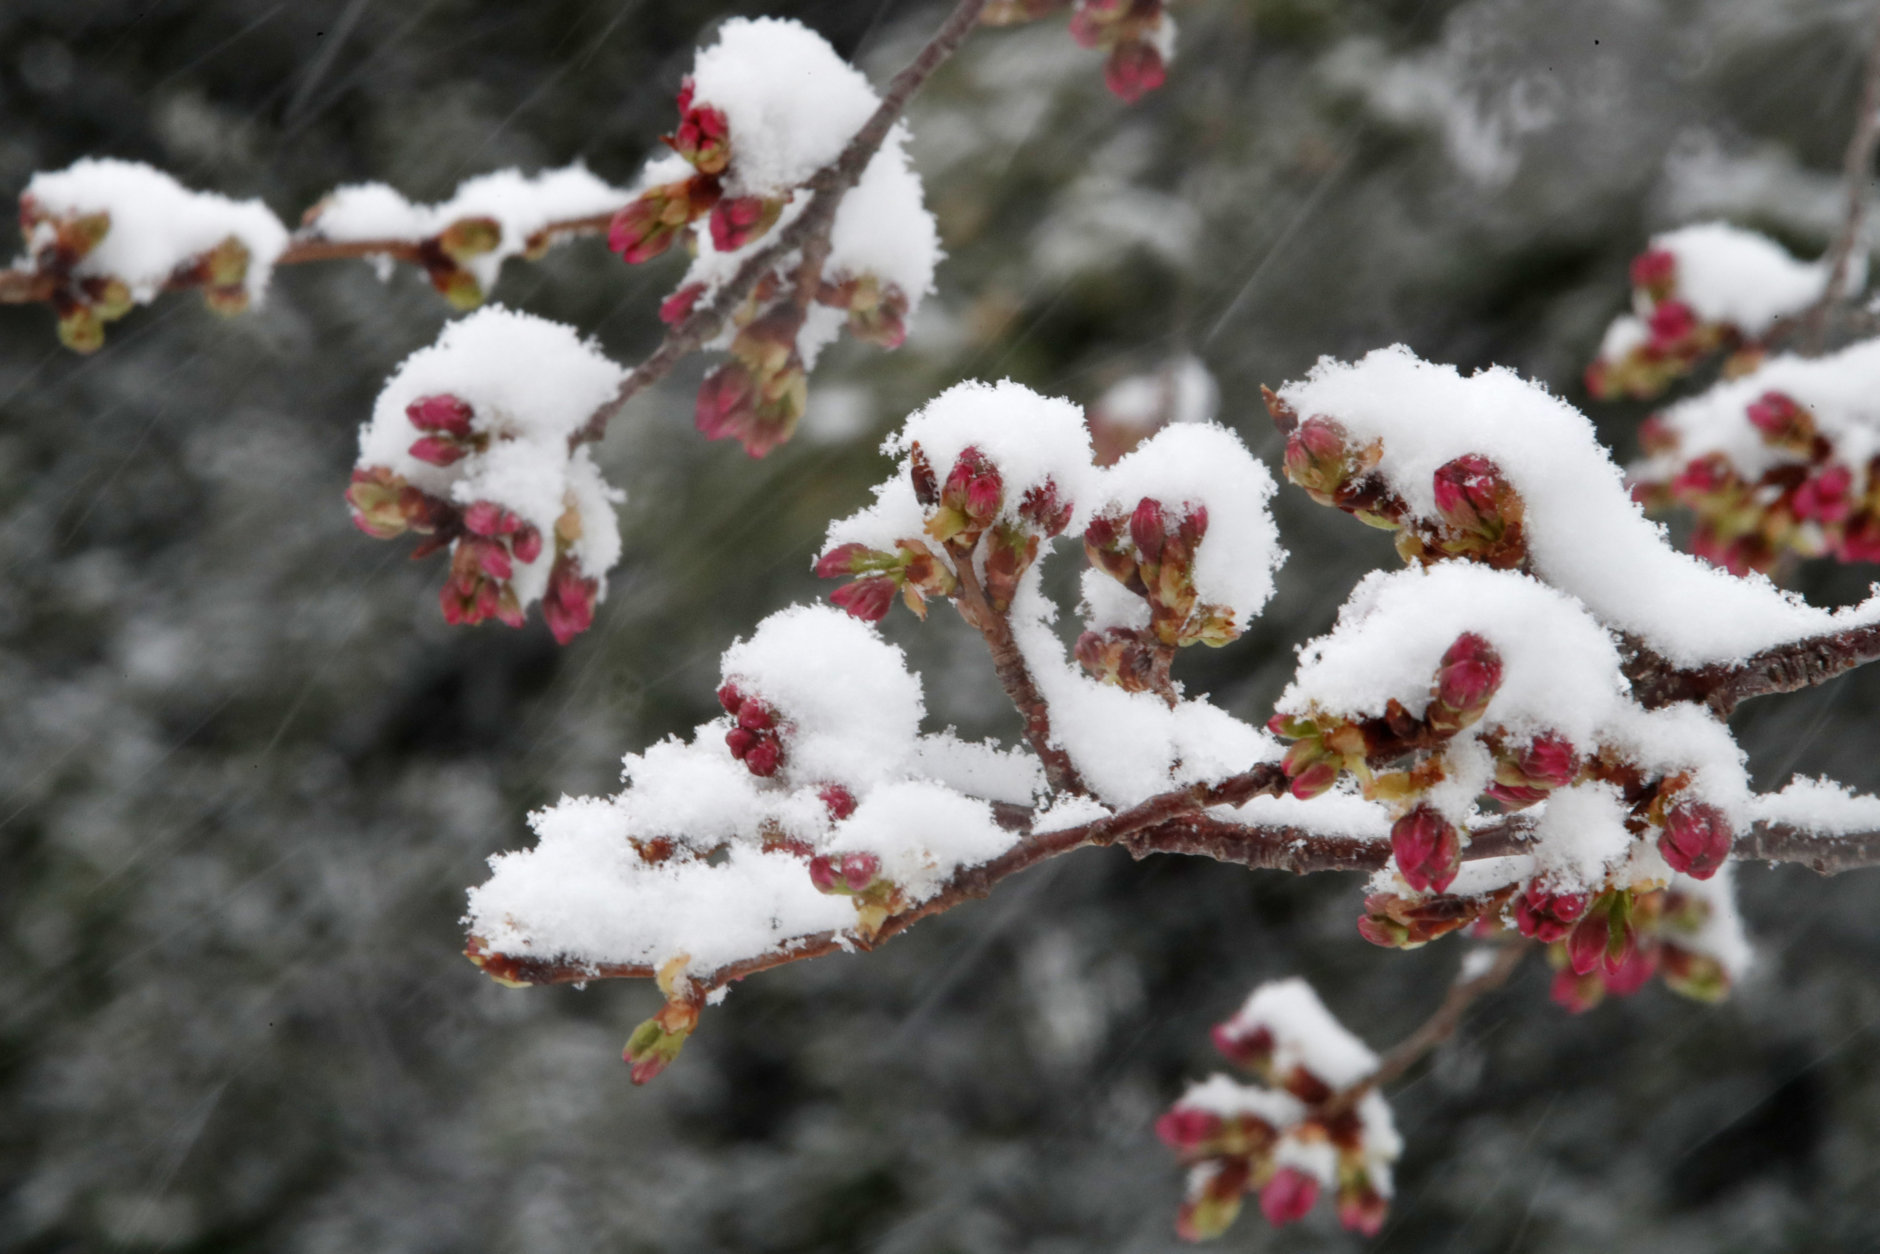 Snow covers budding cherry blossom trees, Wednesday, March 21, 2018, at the tidal basin in Washington during a snow storm on the second day of spring. (AP Photo/Jacquelyn Martin)